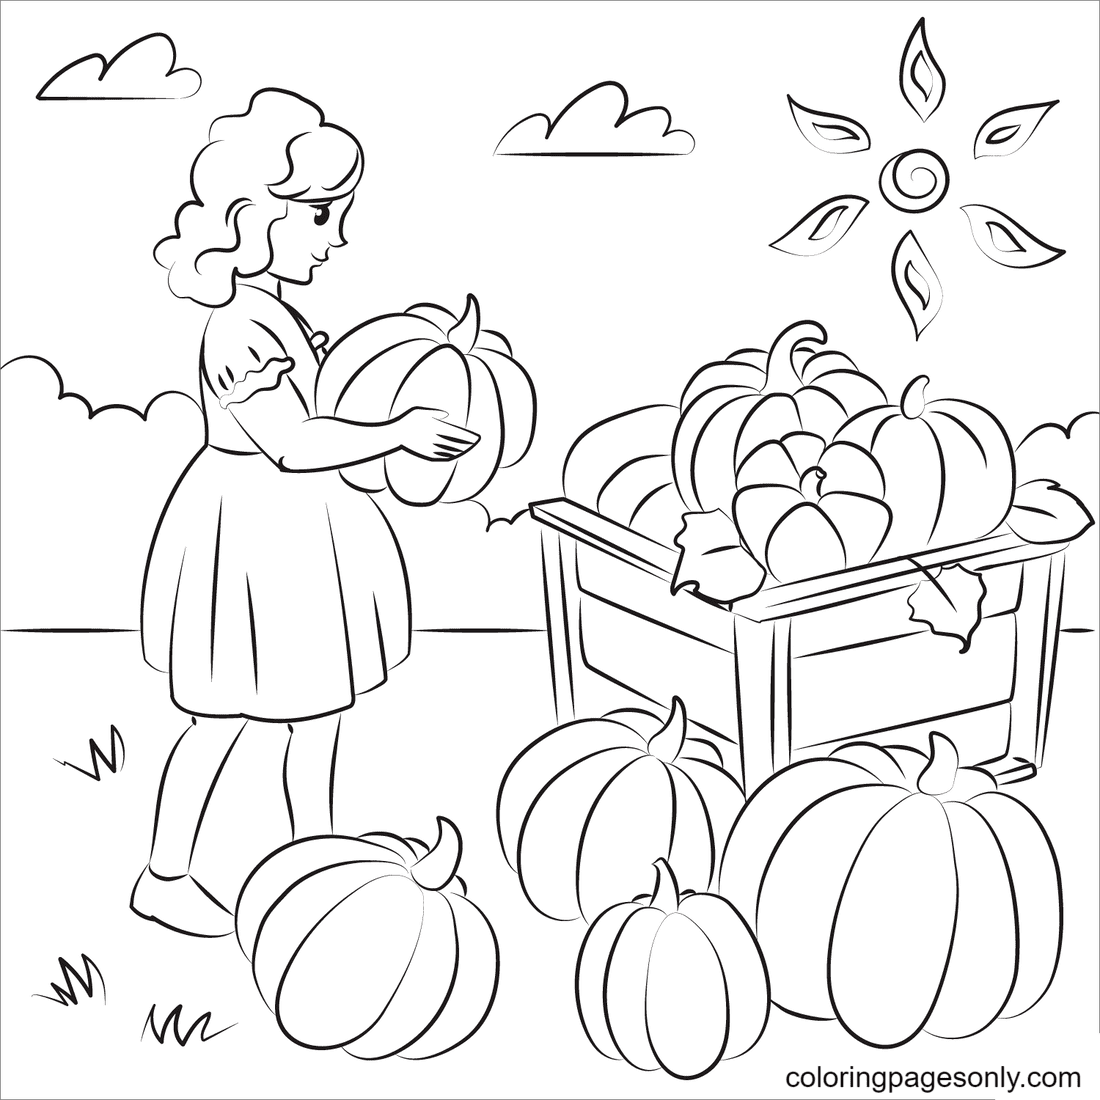 Harvest with Pumpkins Coloring Page